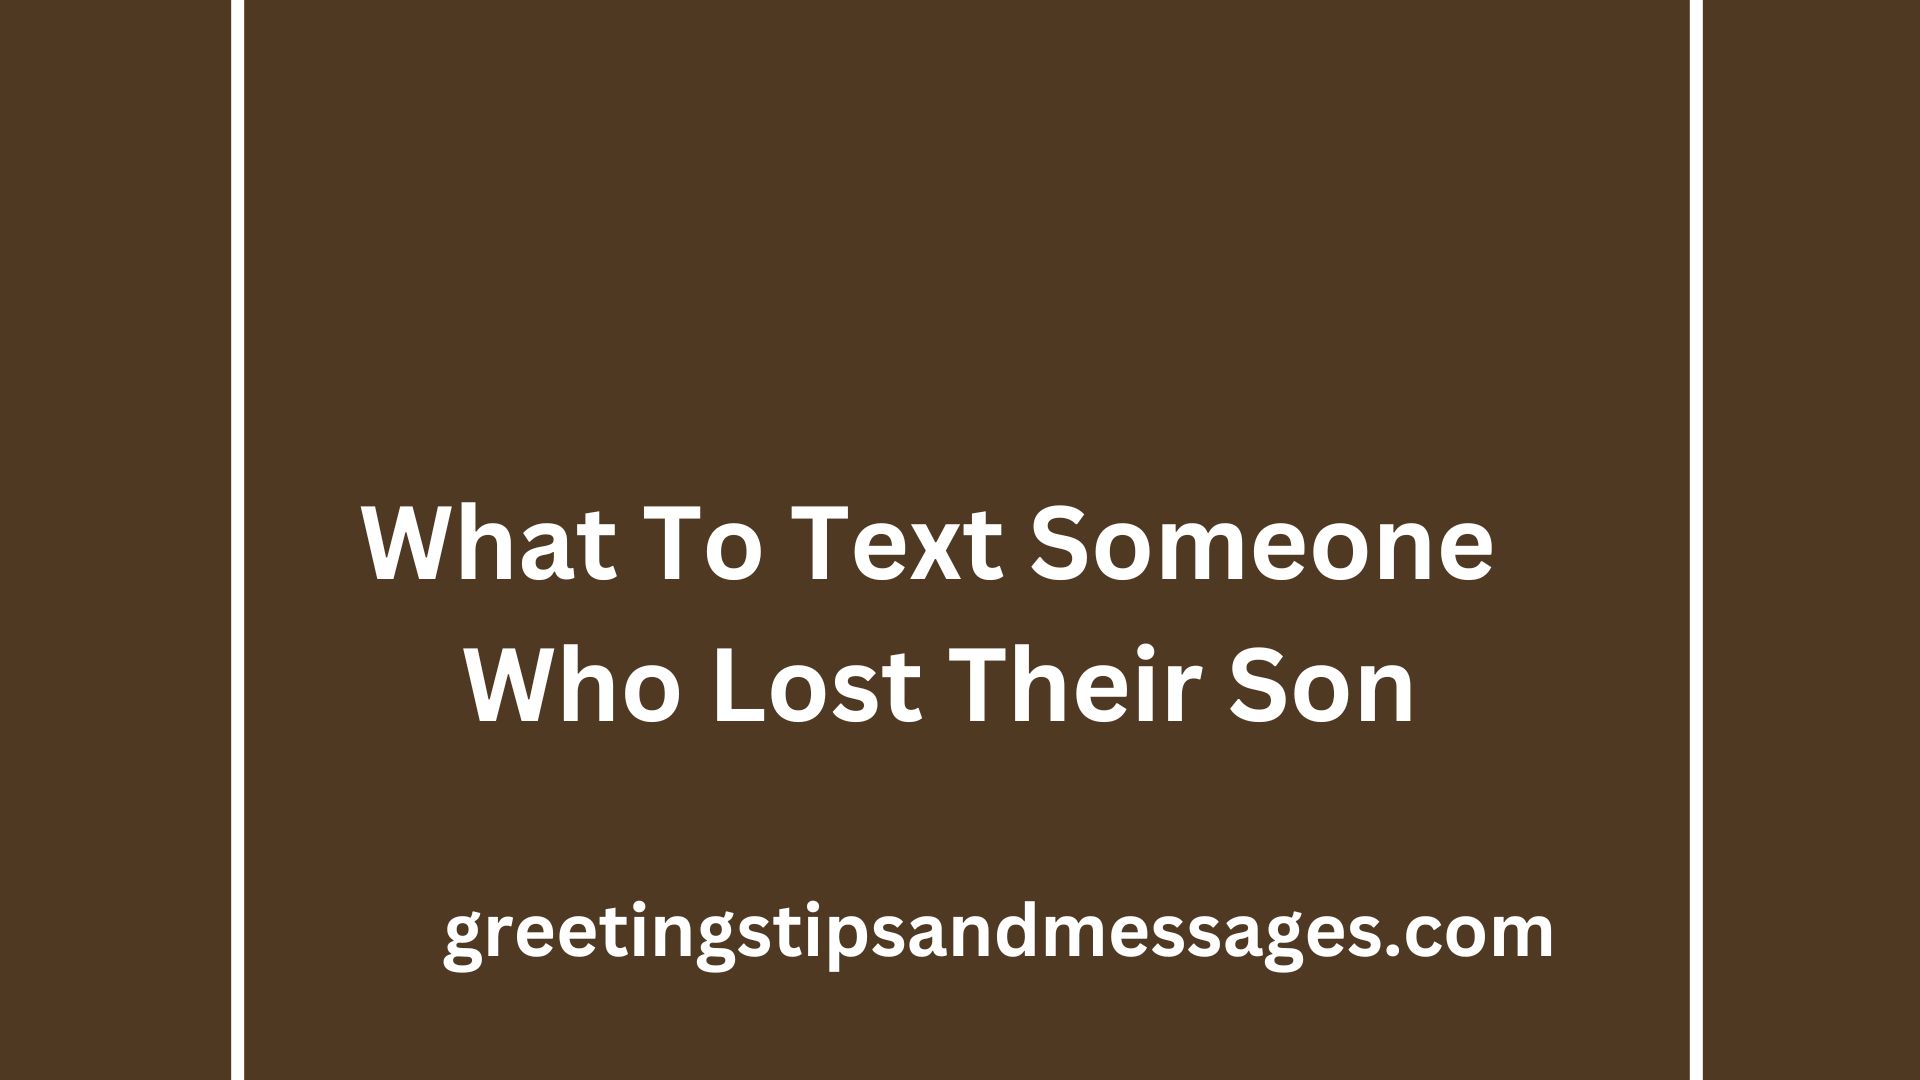 What To Text Someone Who Lost Their Son